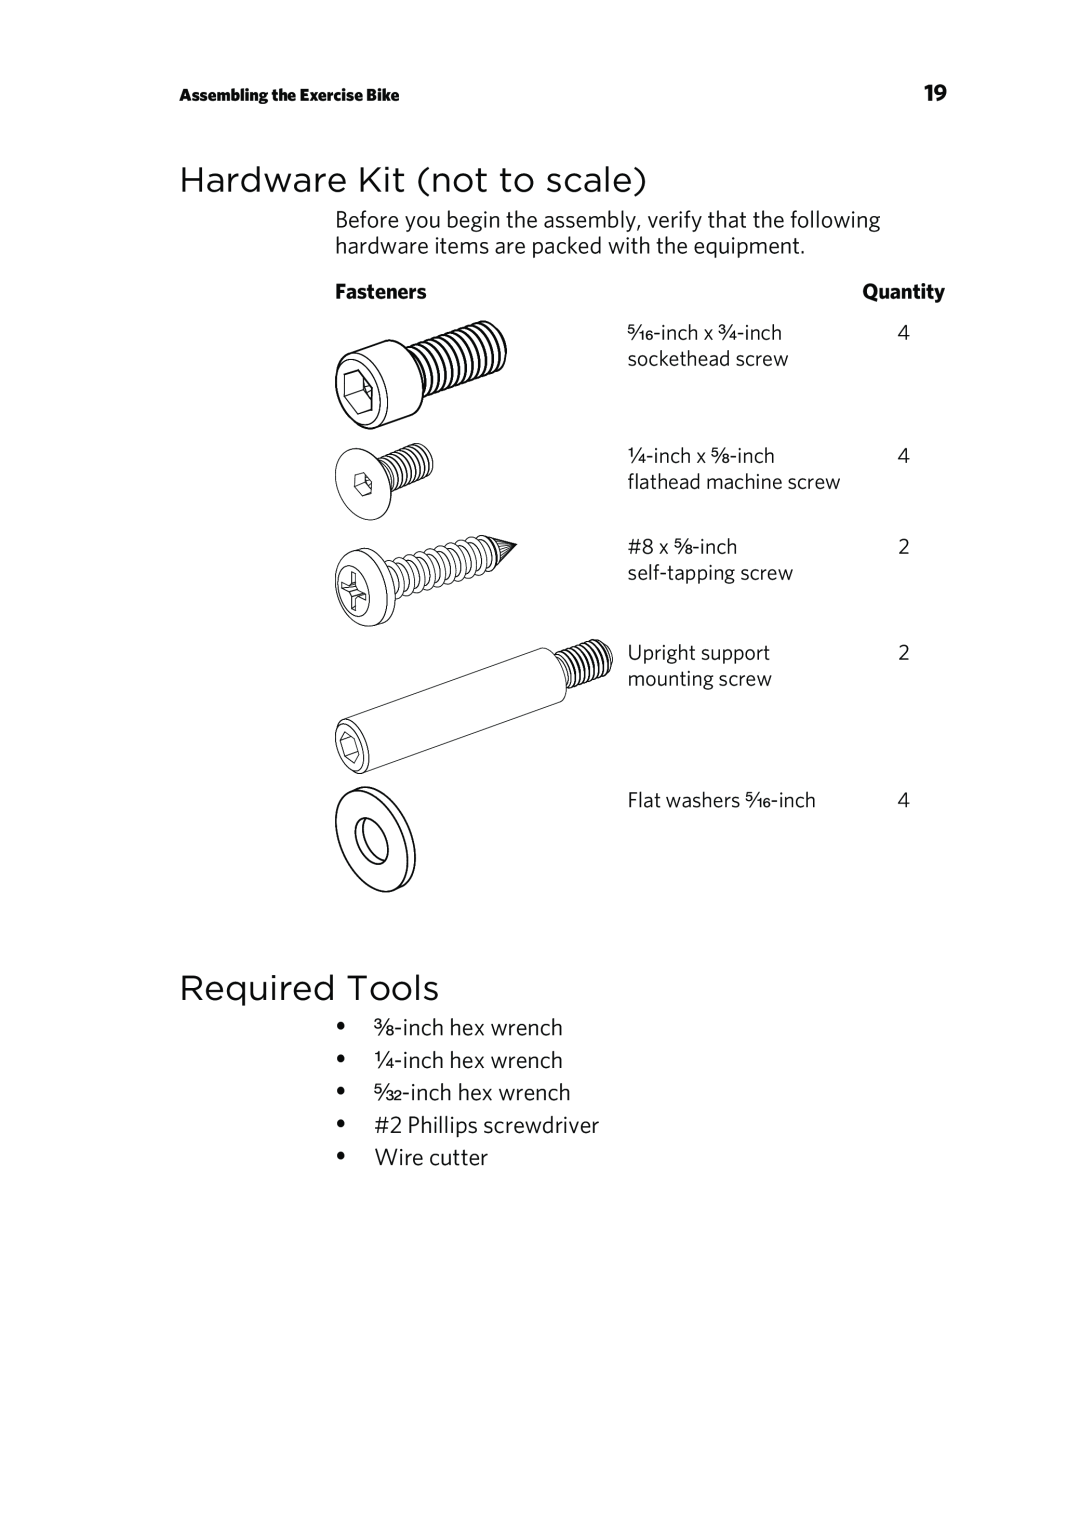 Precor P80 Hardware Kit not to scale, Required Tools, ³₈-inchhex wrench ¹₄-inchhex wrench, Wire cutter, Fasteners 